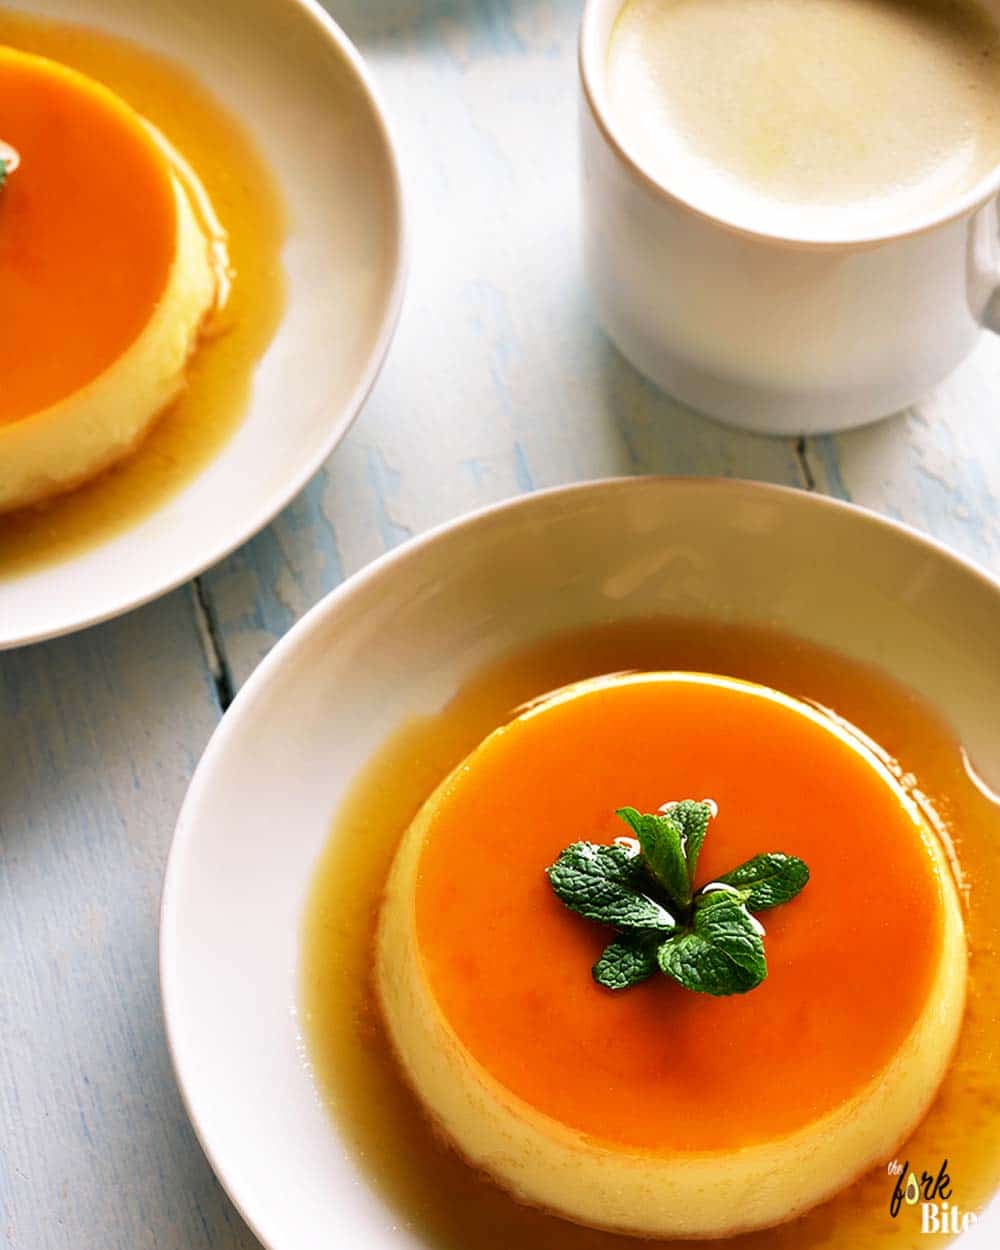 The technique is what matters in making the perfect flan.  The ideal way to make this dessert is through water bath baking or Bain-Marie.